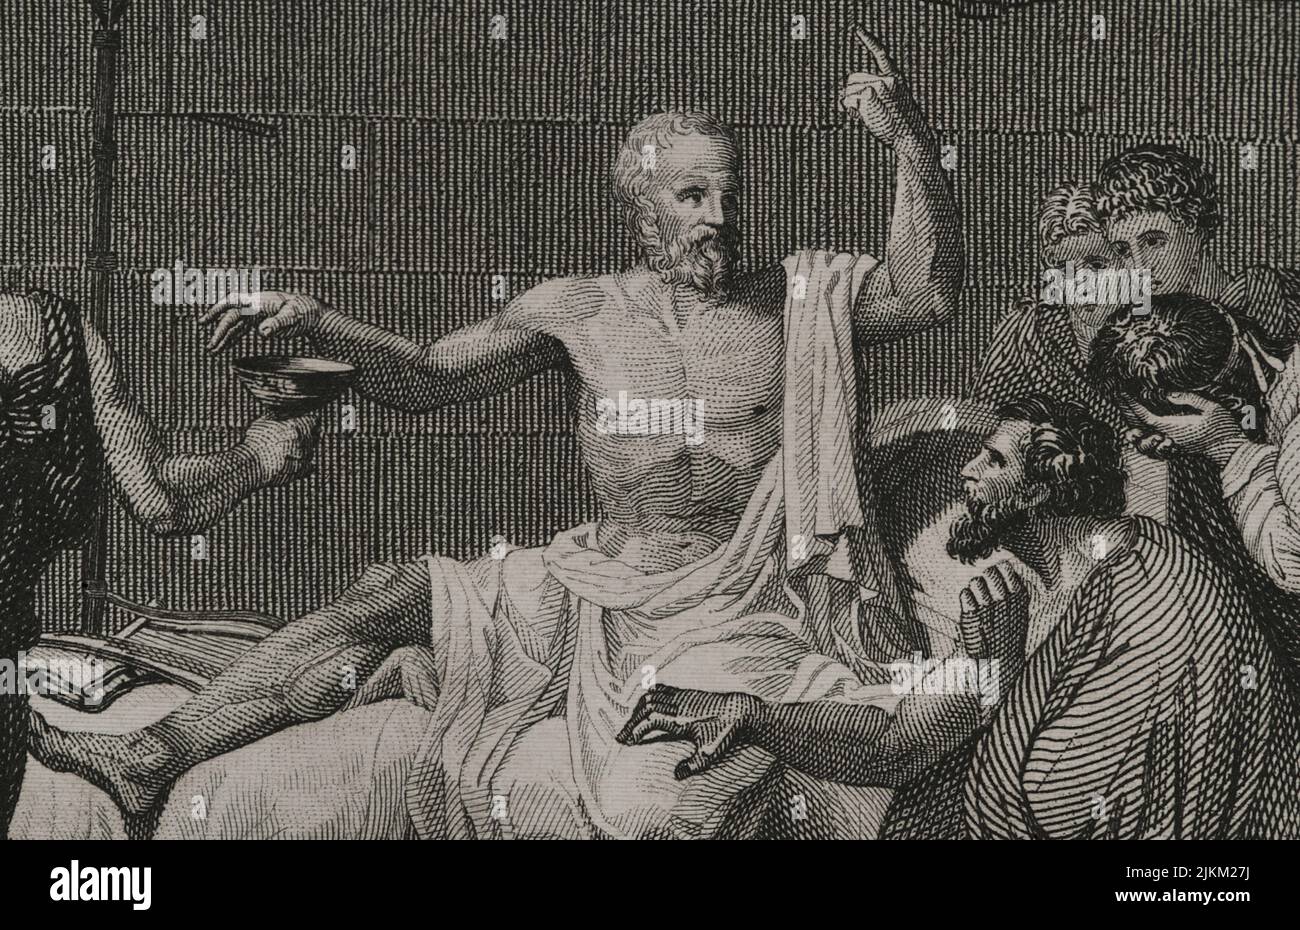 Socrates (ca. 470 BC - 399 BC). Greek philosopher. Accused of corrupting the youth, he was condemned to death by the Heliaia (Supreme Court of Ancient Athens). Death of Socrates. Detail of a engraving by A. Roca, based on the painting by Jacques-Louis David. 'Historia Universal', by César Cantú. Volume I, 1854. Stock Photo